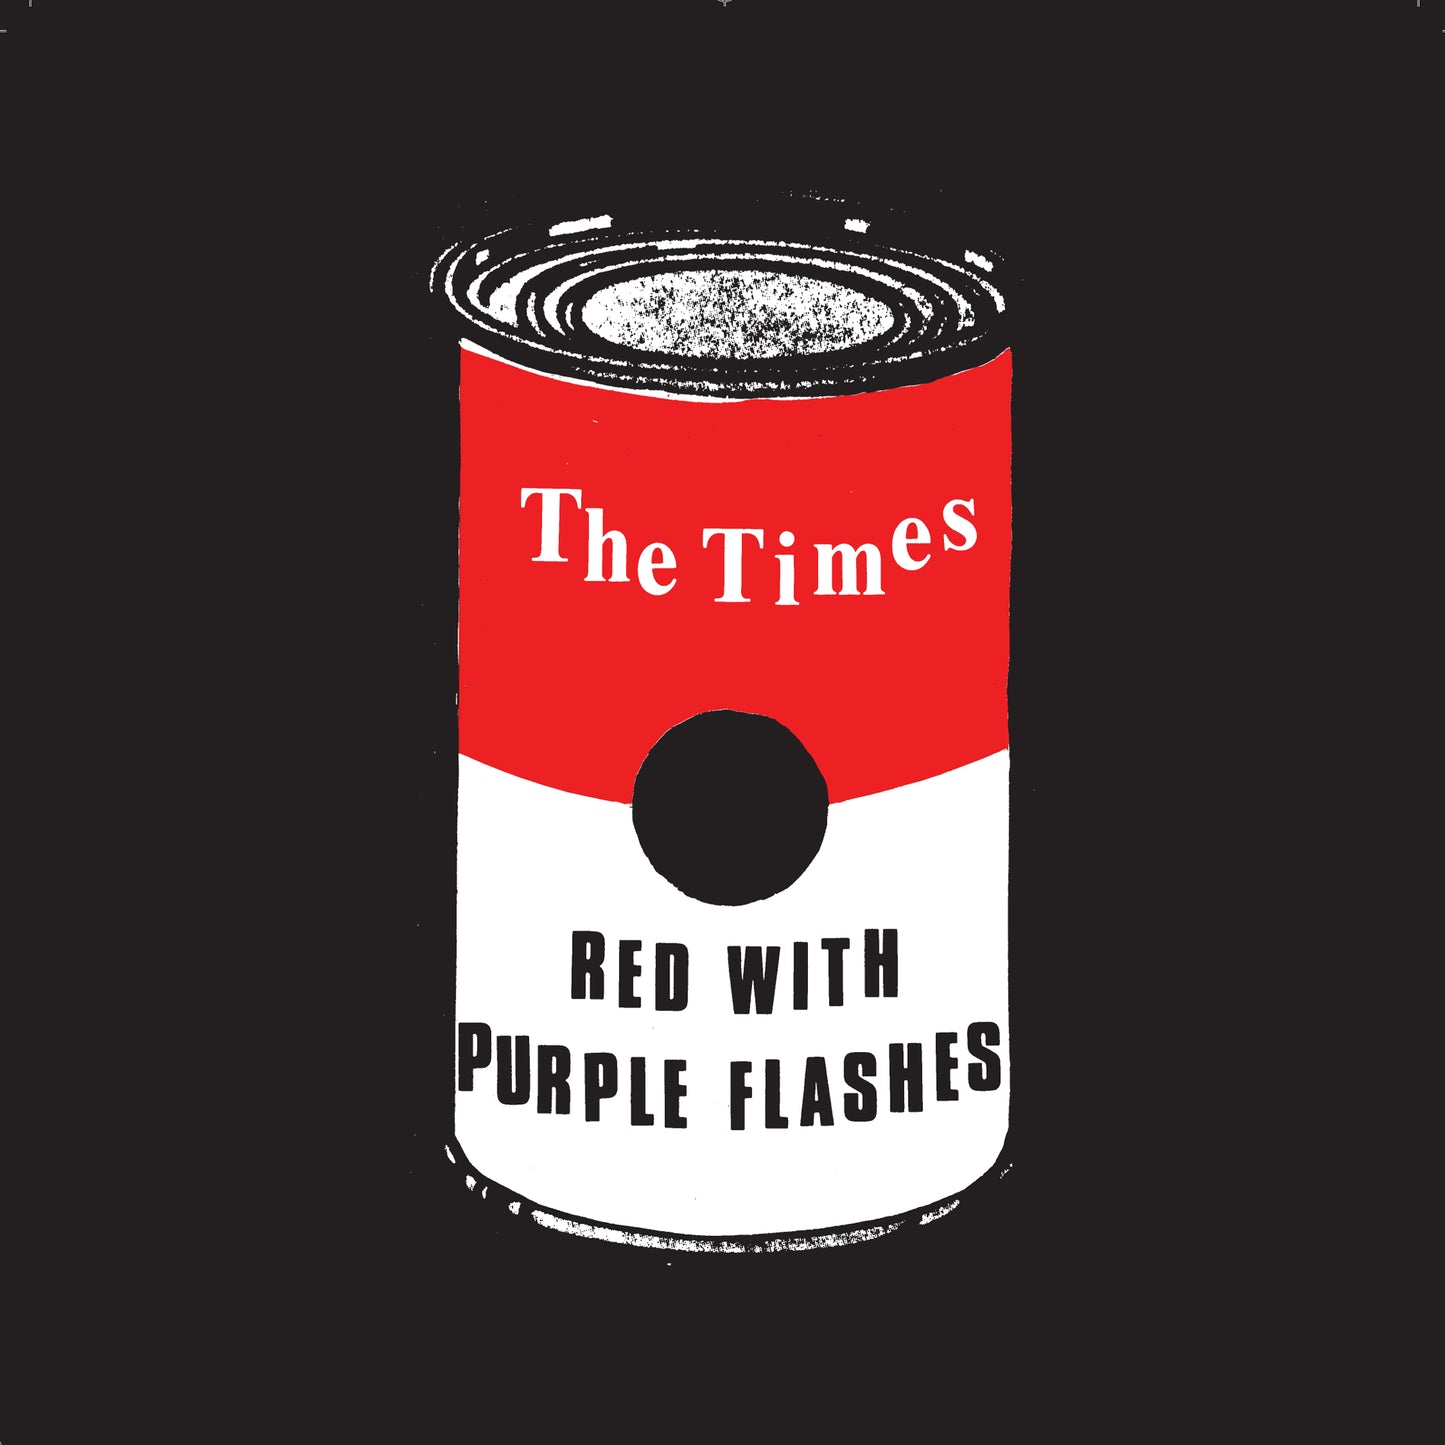 THE TIMES - "RED WITH PURPLE FLASHES" 7"